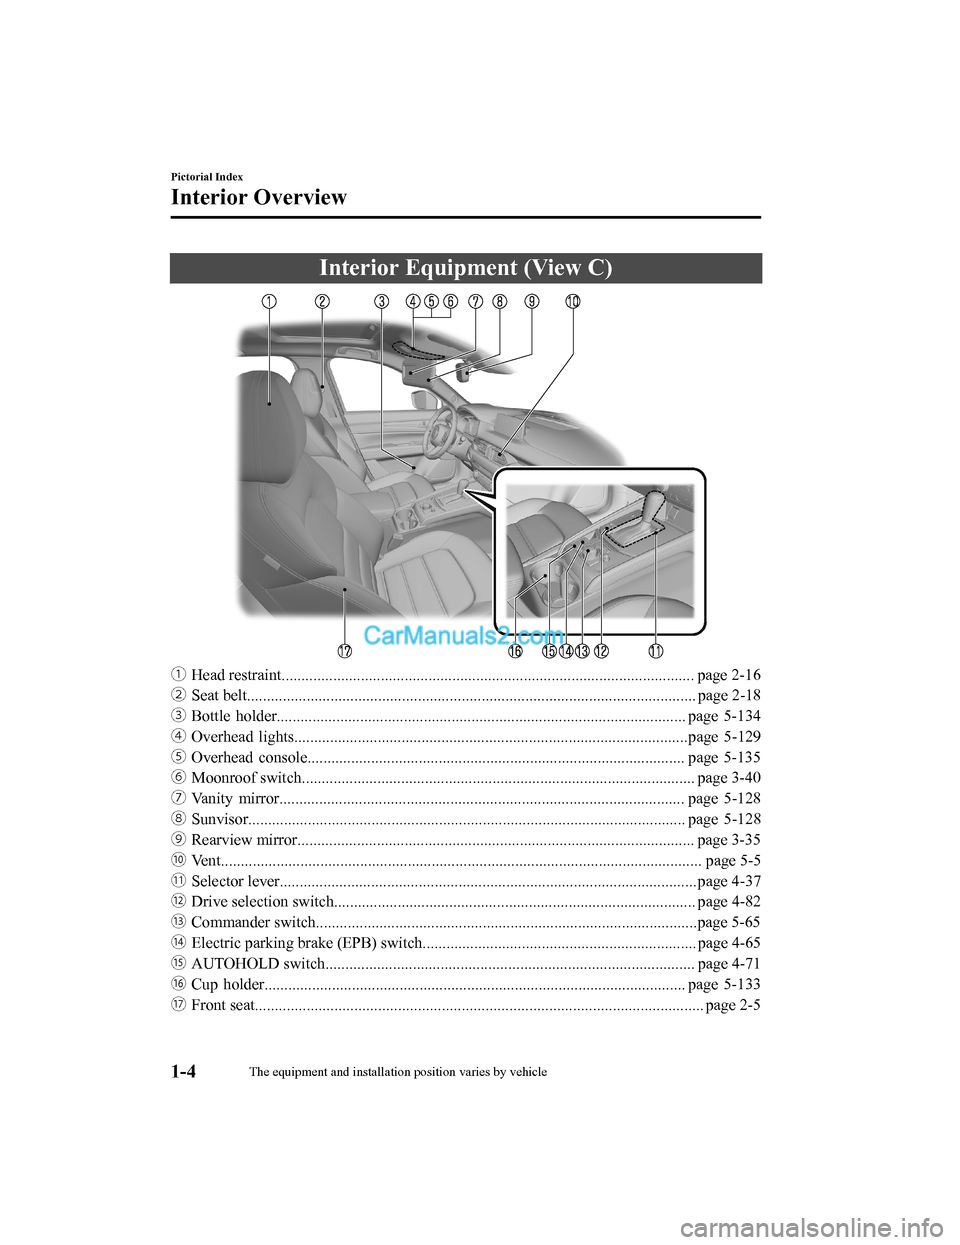 MAZDA MODEL CX-5 2018  Owners Manual (in English) Interior Equipment (View C)
ƒHead restraint........................................................................................................ page 2-1 6
„ Seat belt.........................